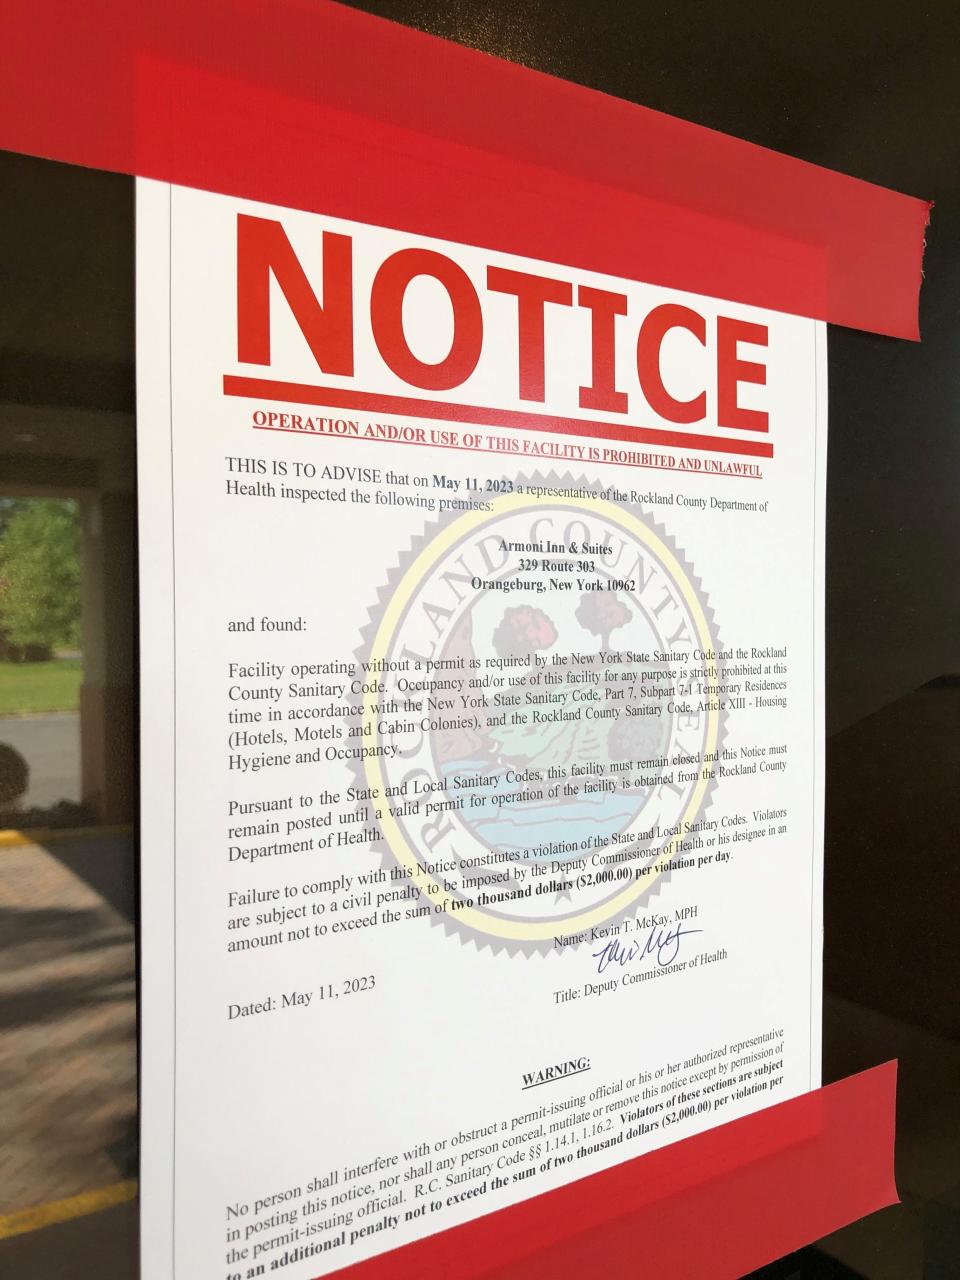 A notice on the front door of the Armoni Inn & Suites in Orangeburg, seen Thursday, May 17, 2023, states that operation of the facility is prohibited. The hotel had been one that contracted with New York City to house single male asylum seekers.